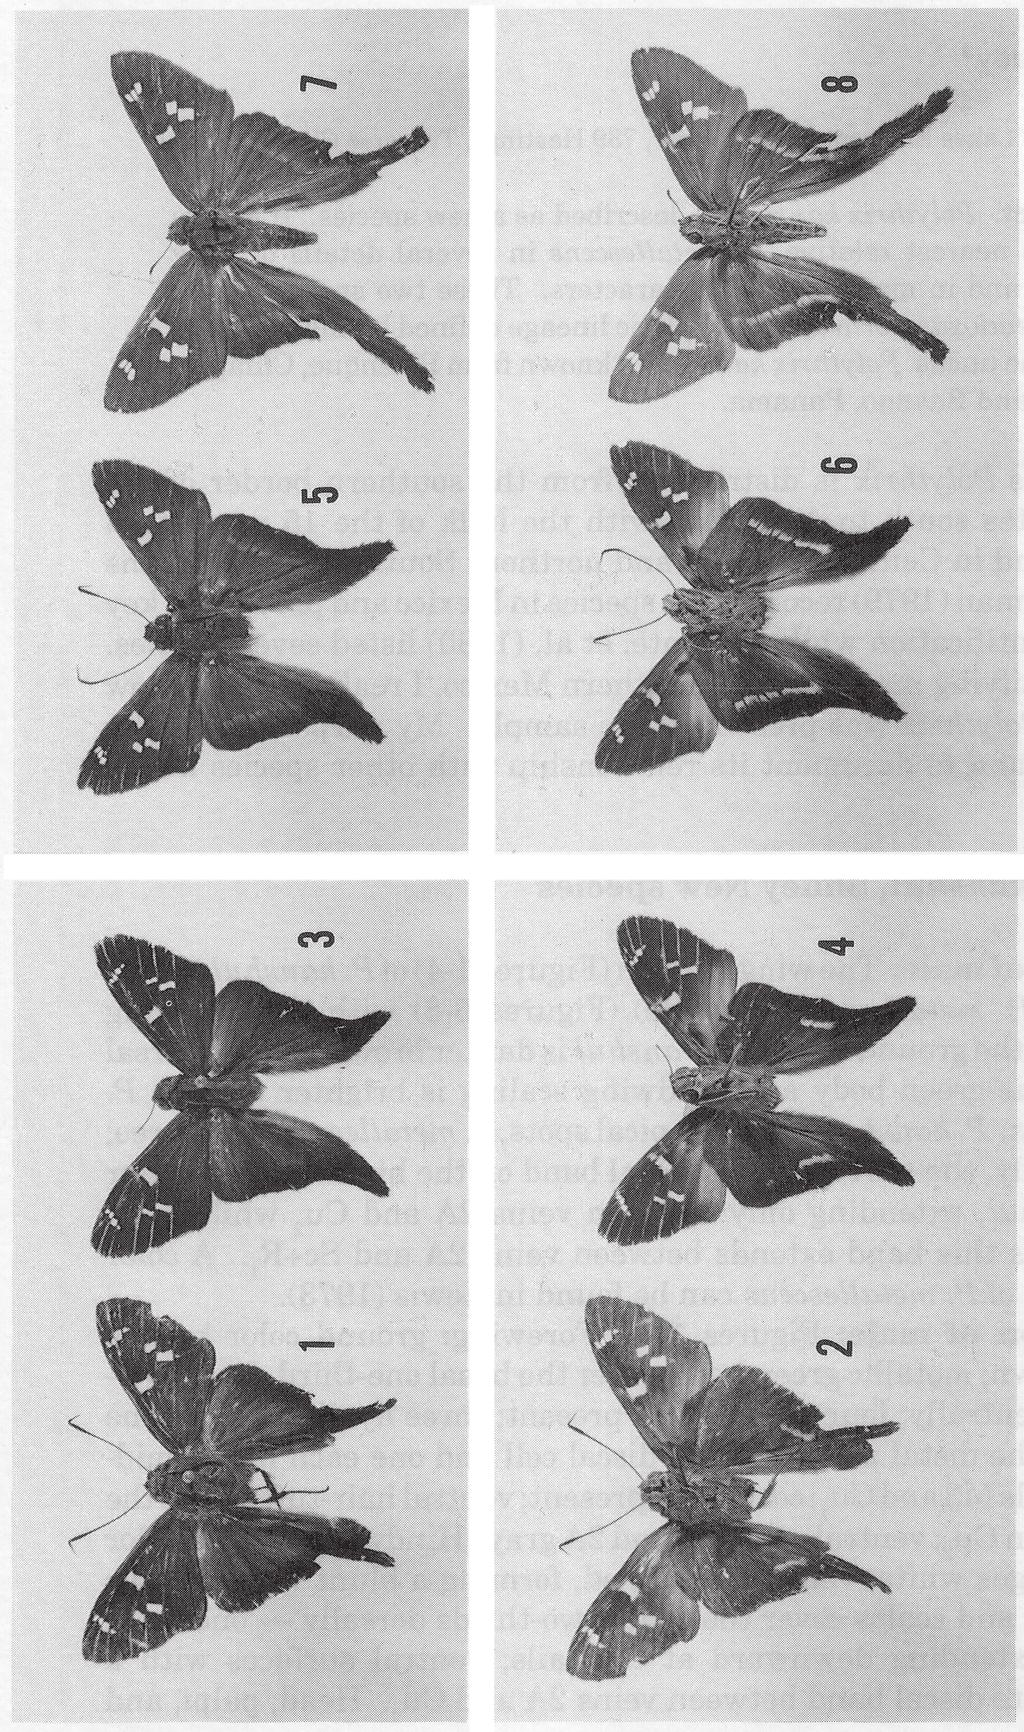 Figures 1-4. Polythrix kanshul; 1, dorsal view, holotype male, Palenque, Mexico; 2, ventral view of previous specimen; 3, paratype male, Bayano, Panama; 4, ventral view of previous specimen.